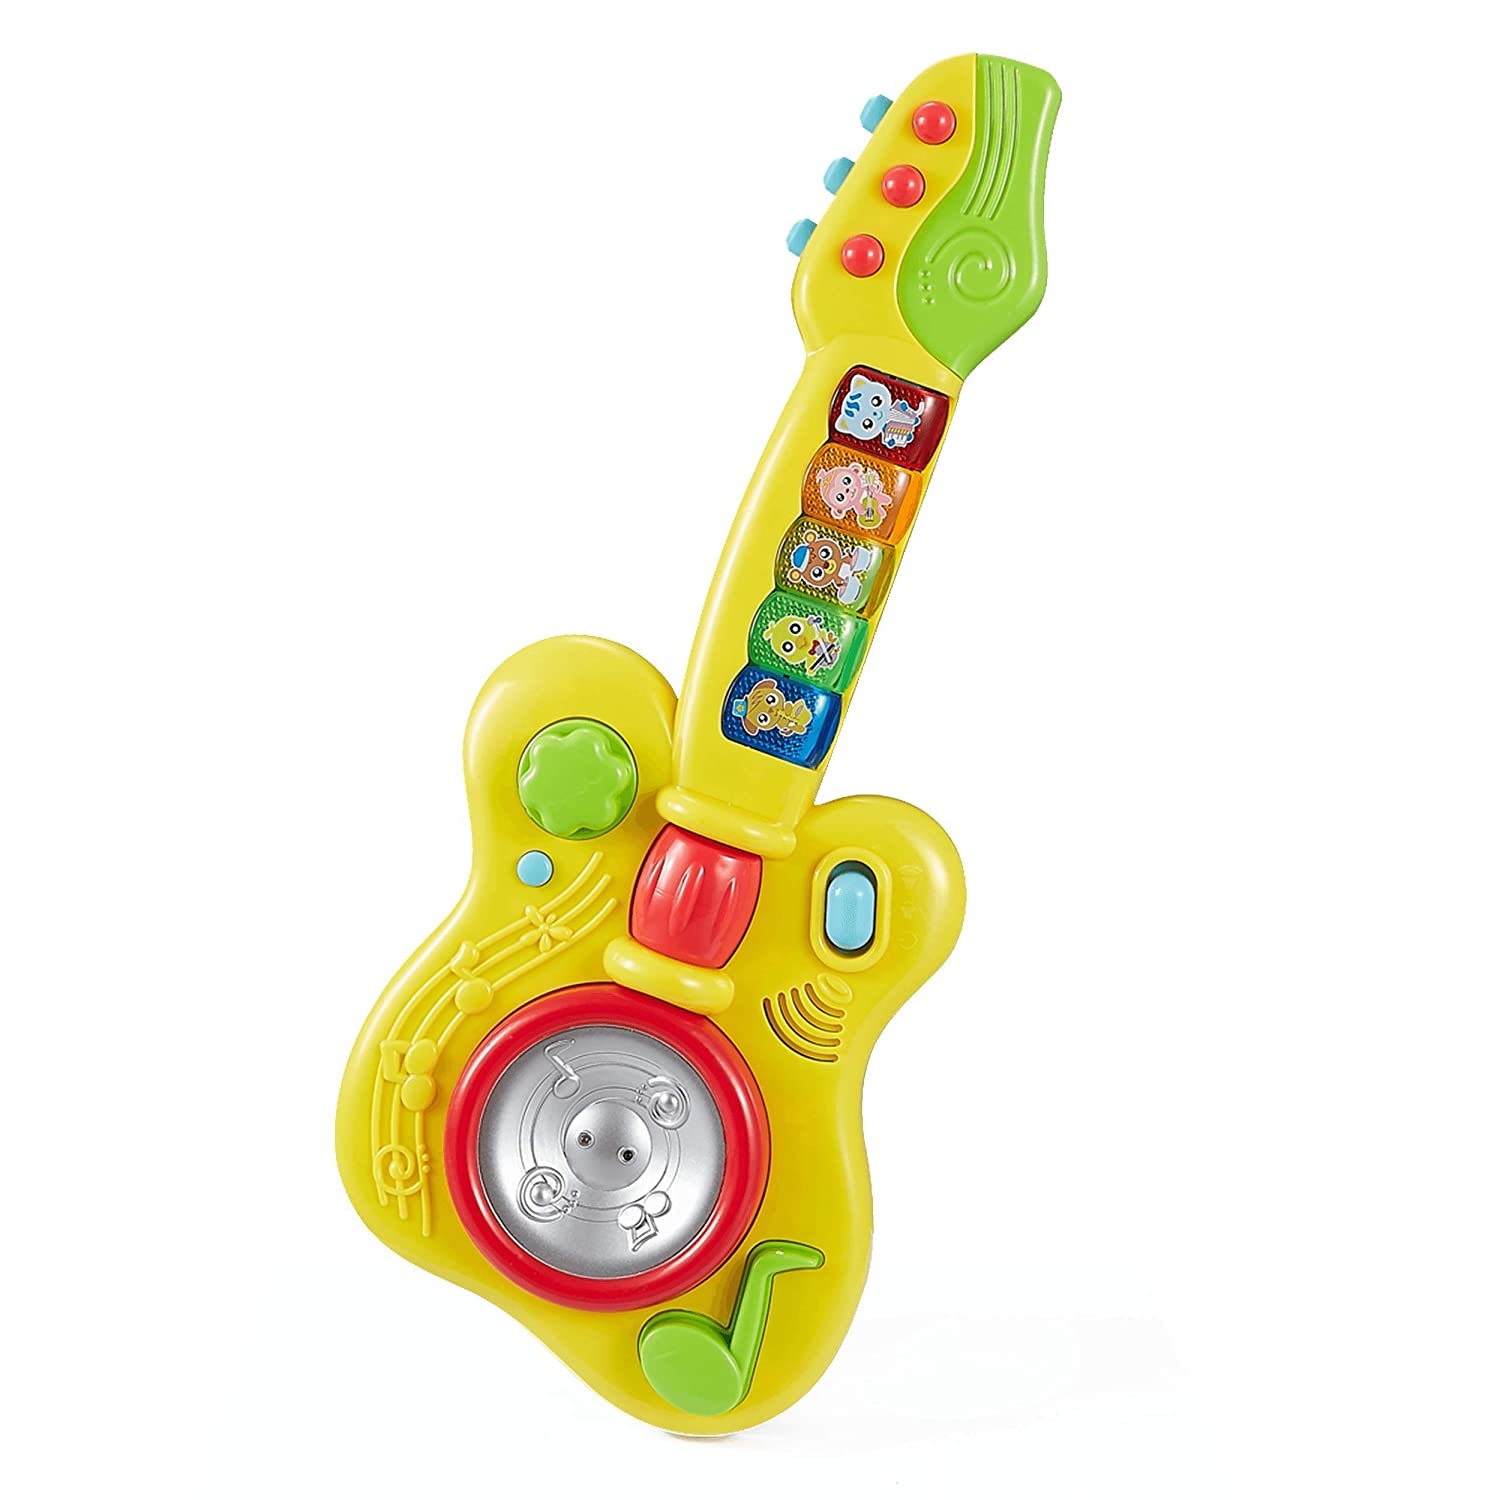 Think Gizmos Musical Guitar Toy for Toddlers TG729 - Musical Toy